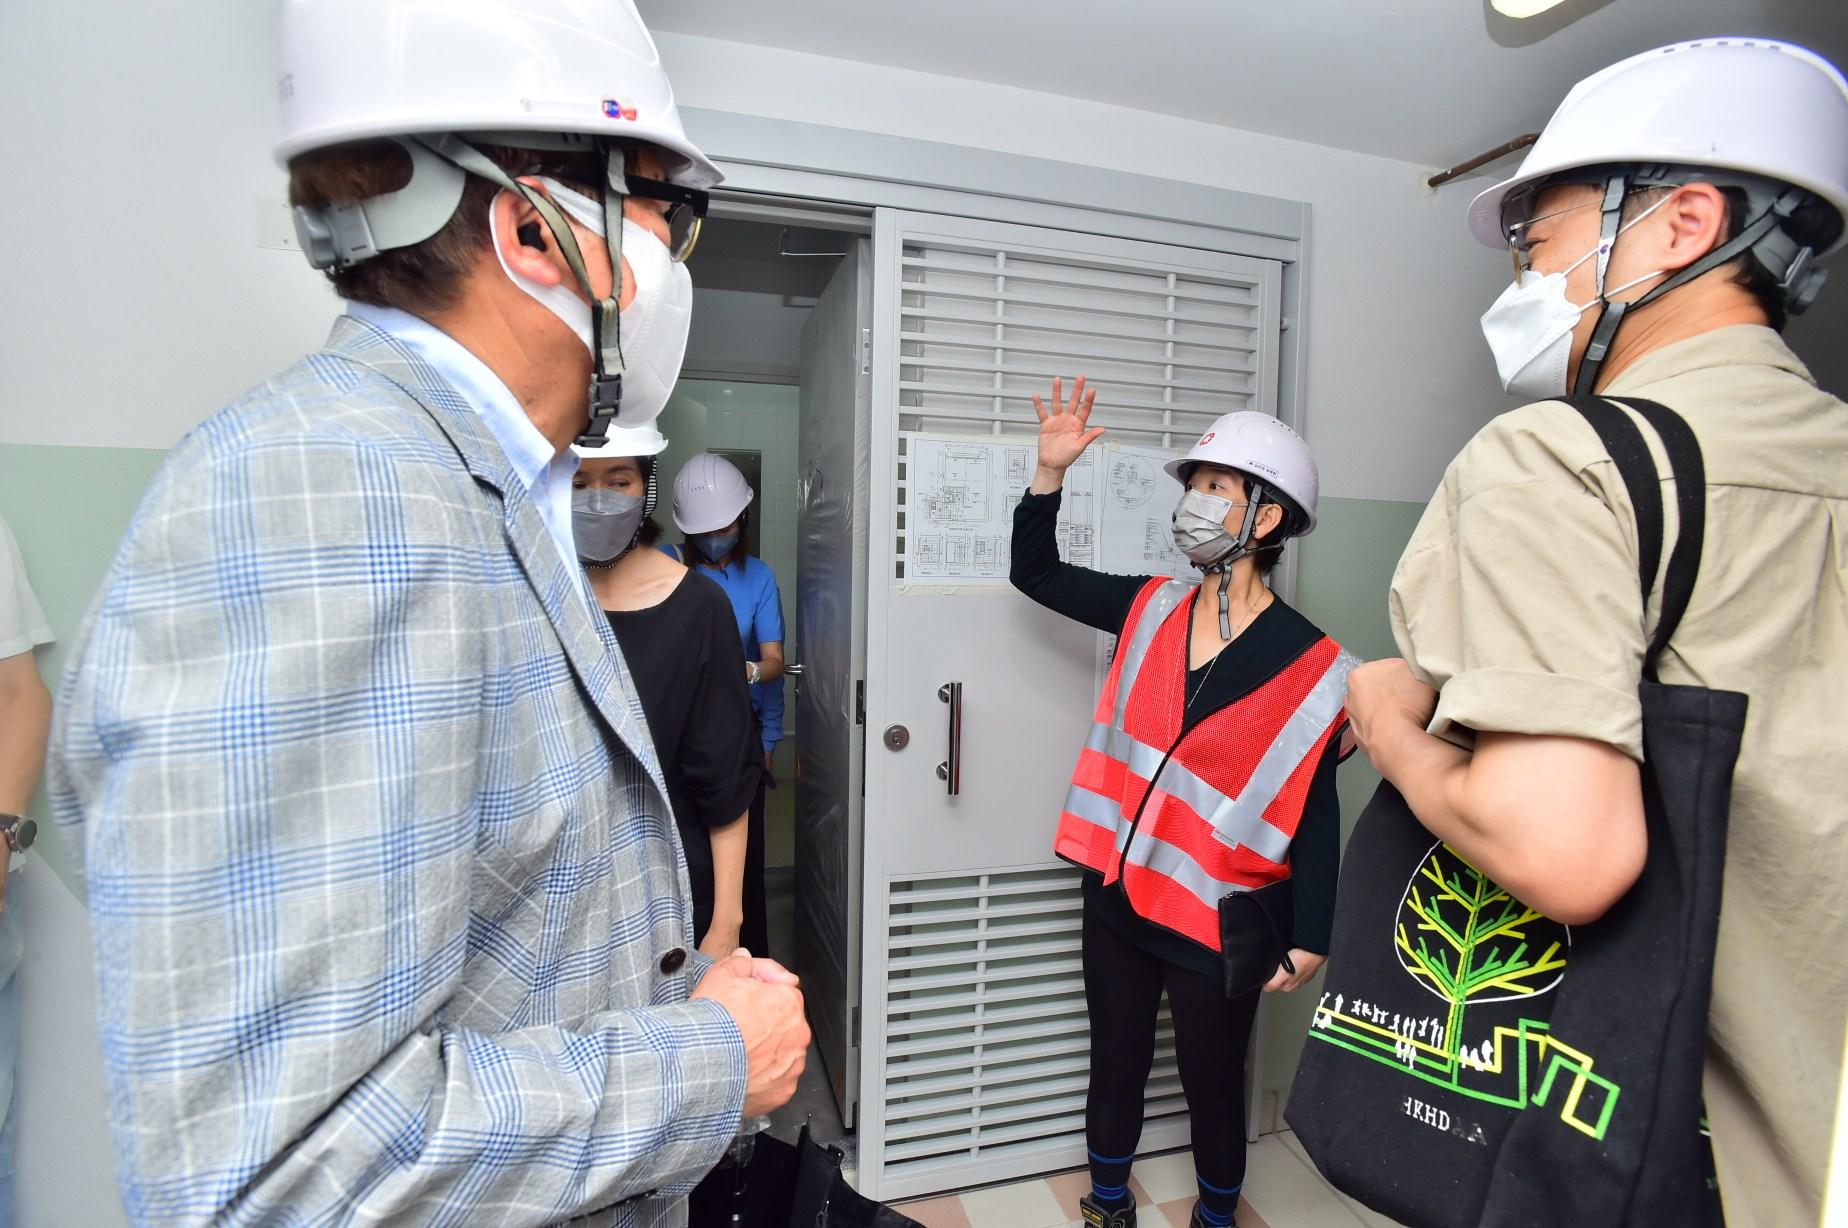 The Secretary for Housing, Ms Winnie Ho, visited Tai Po Area 9 this morning (July 7) to grasp the latest progress of the public rental housing development projects. Photo shows Ms Ho (second right) being briefed about the project details and progress by staff members of the Housing Department when touring Fu Tip Estate, which is under construction.